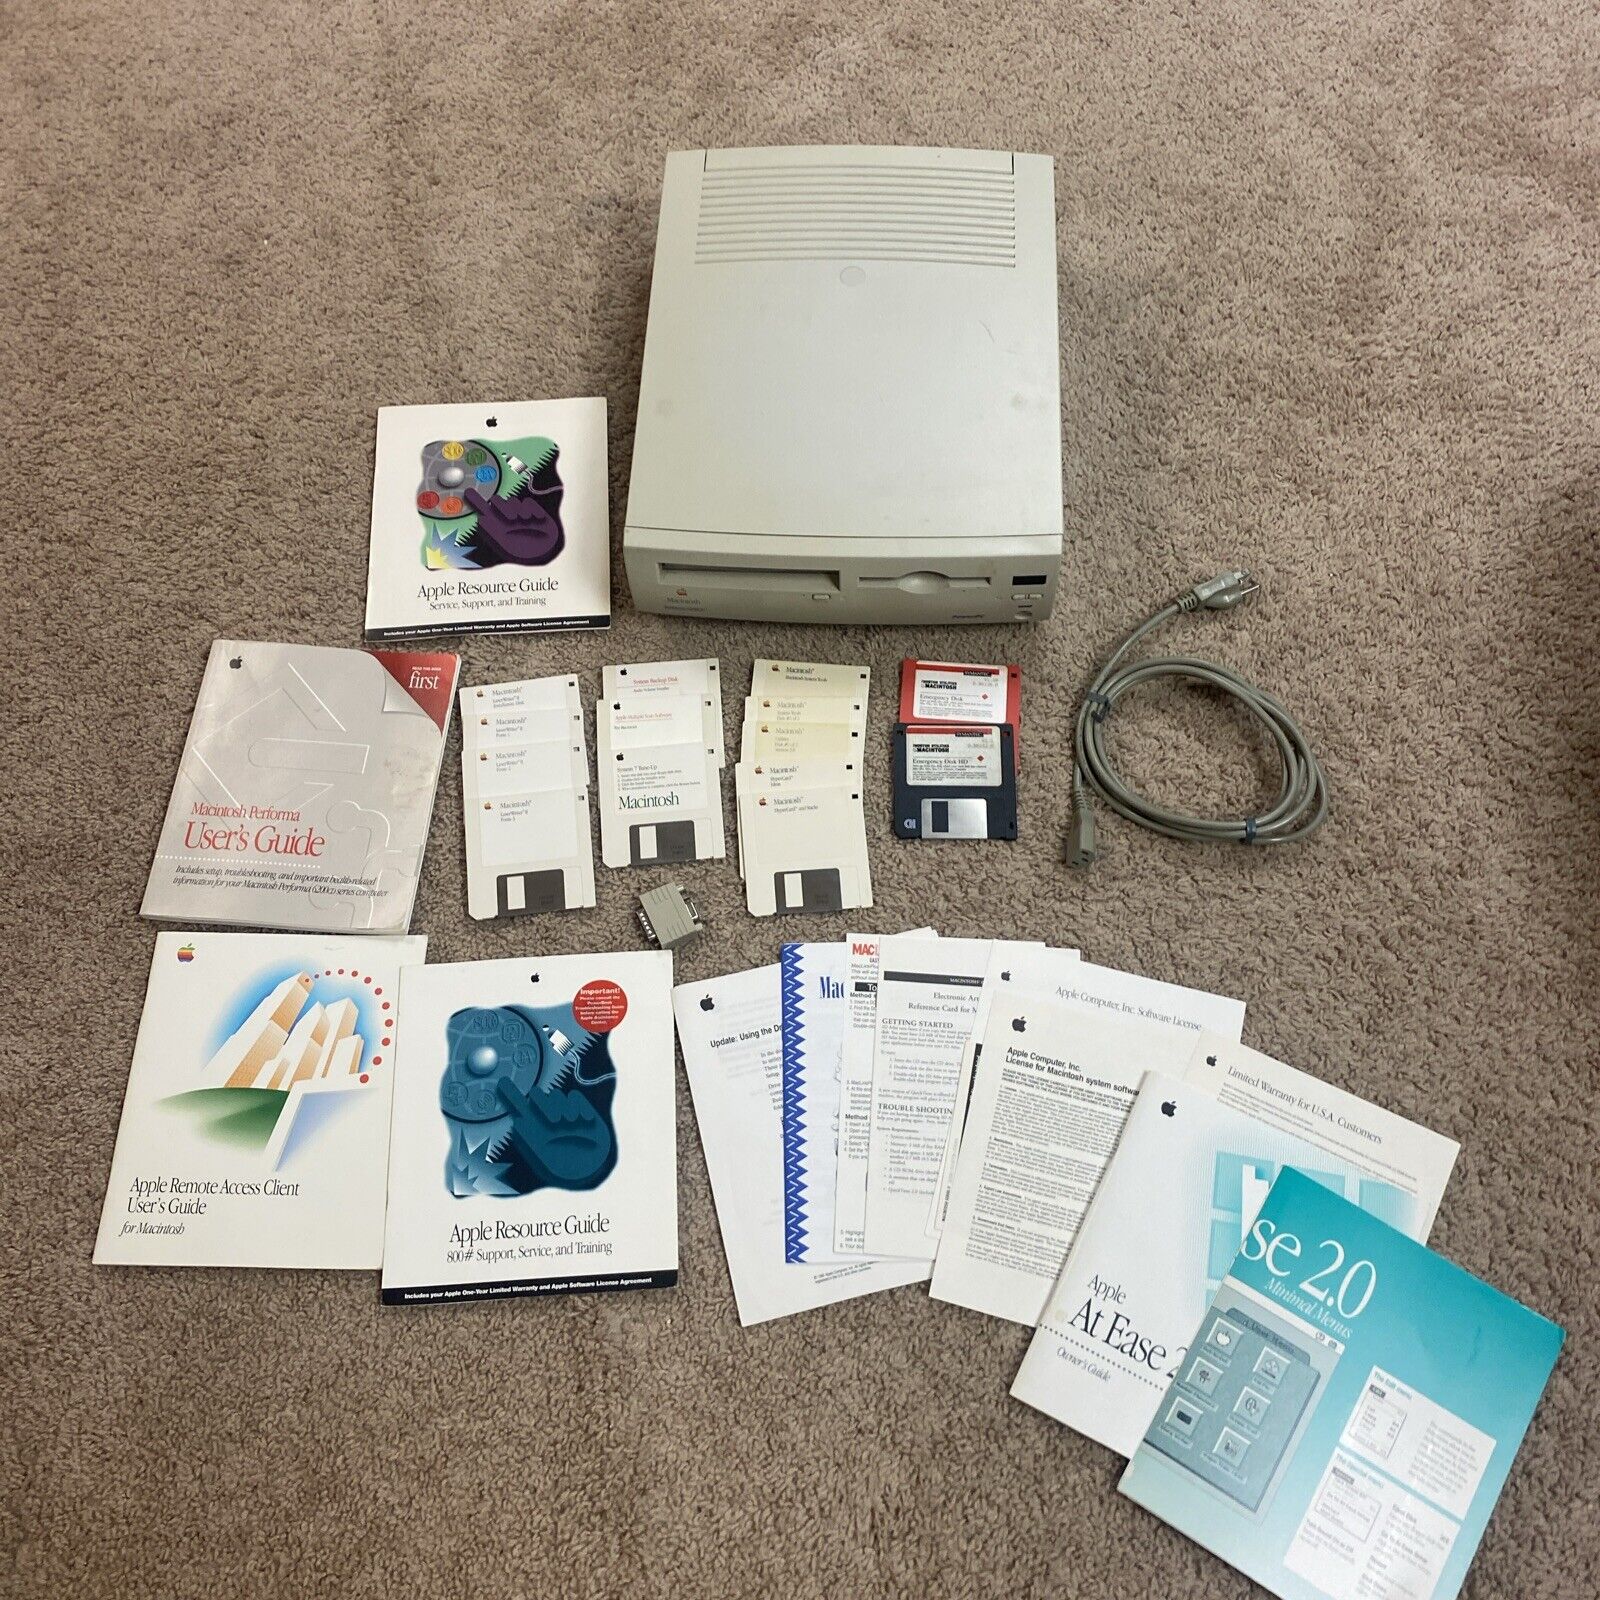 Apple Macintosh Performa 6200CD Computer And Books, Disks- Powers Up.